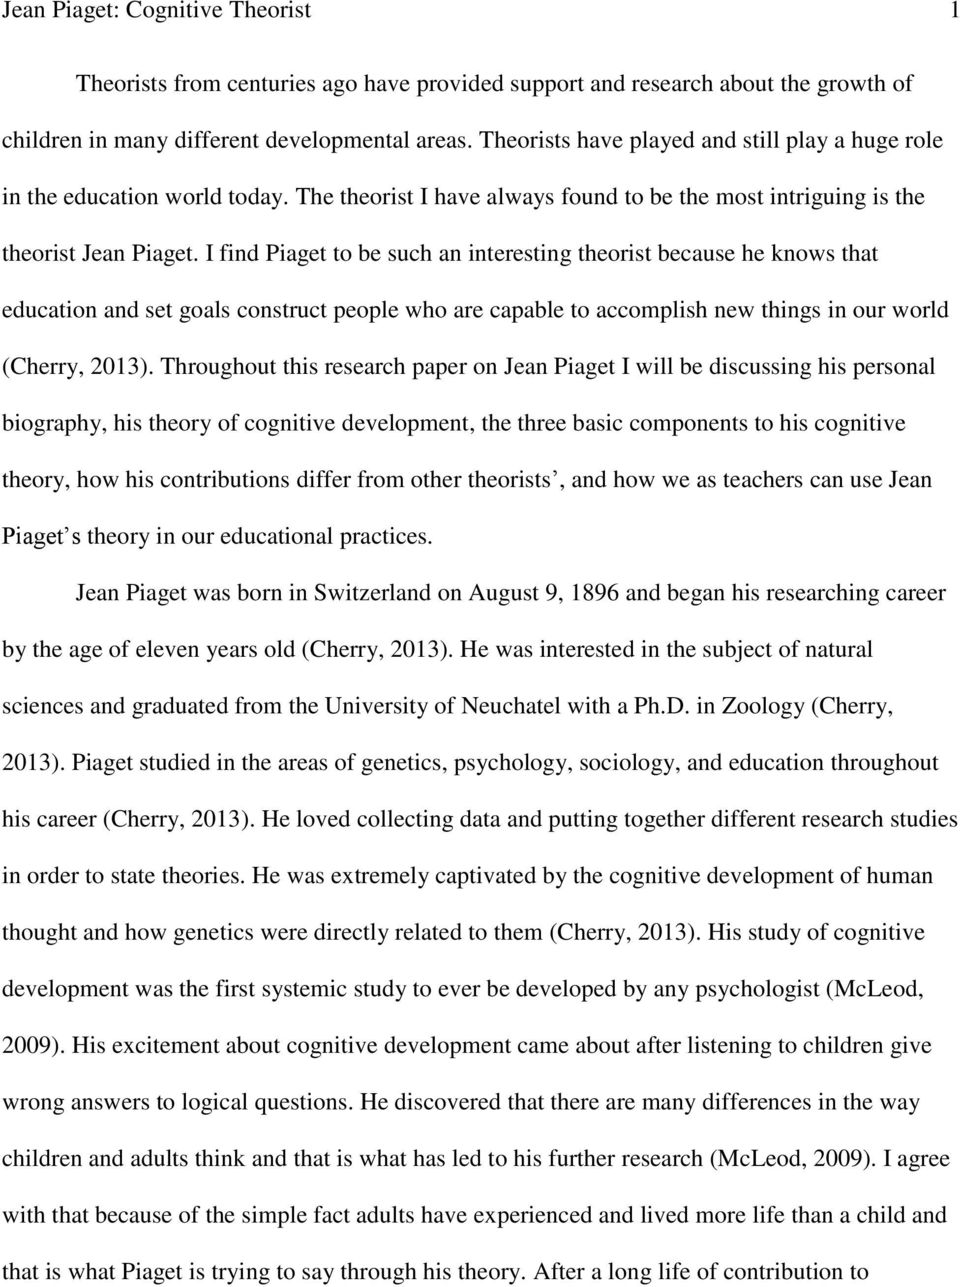 I find Piaget to be such an interesting theorist because he knows that education and set goals construct people who are capable to accomplish new things in our world (Cherry, 2013).